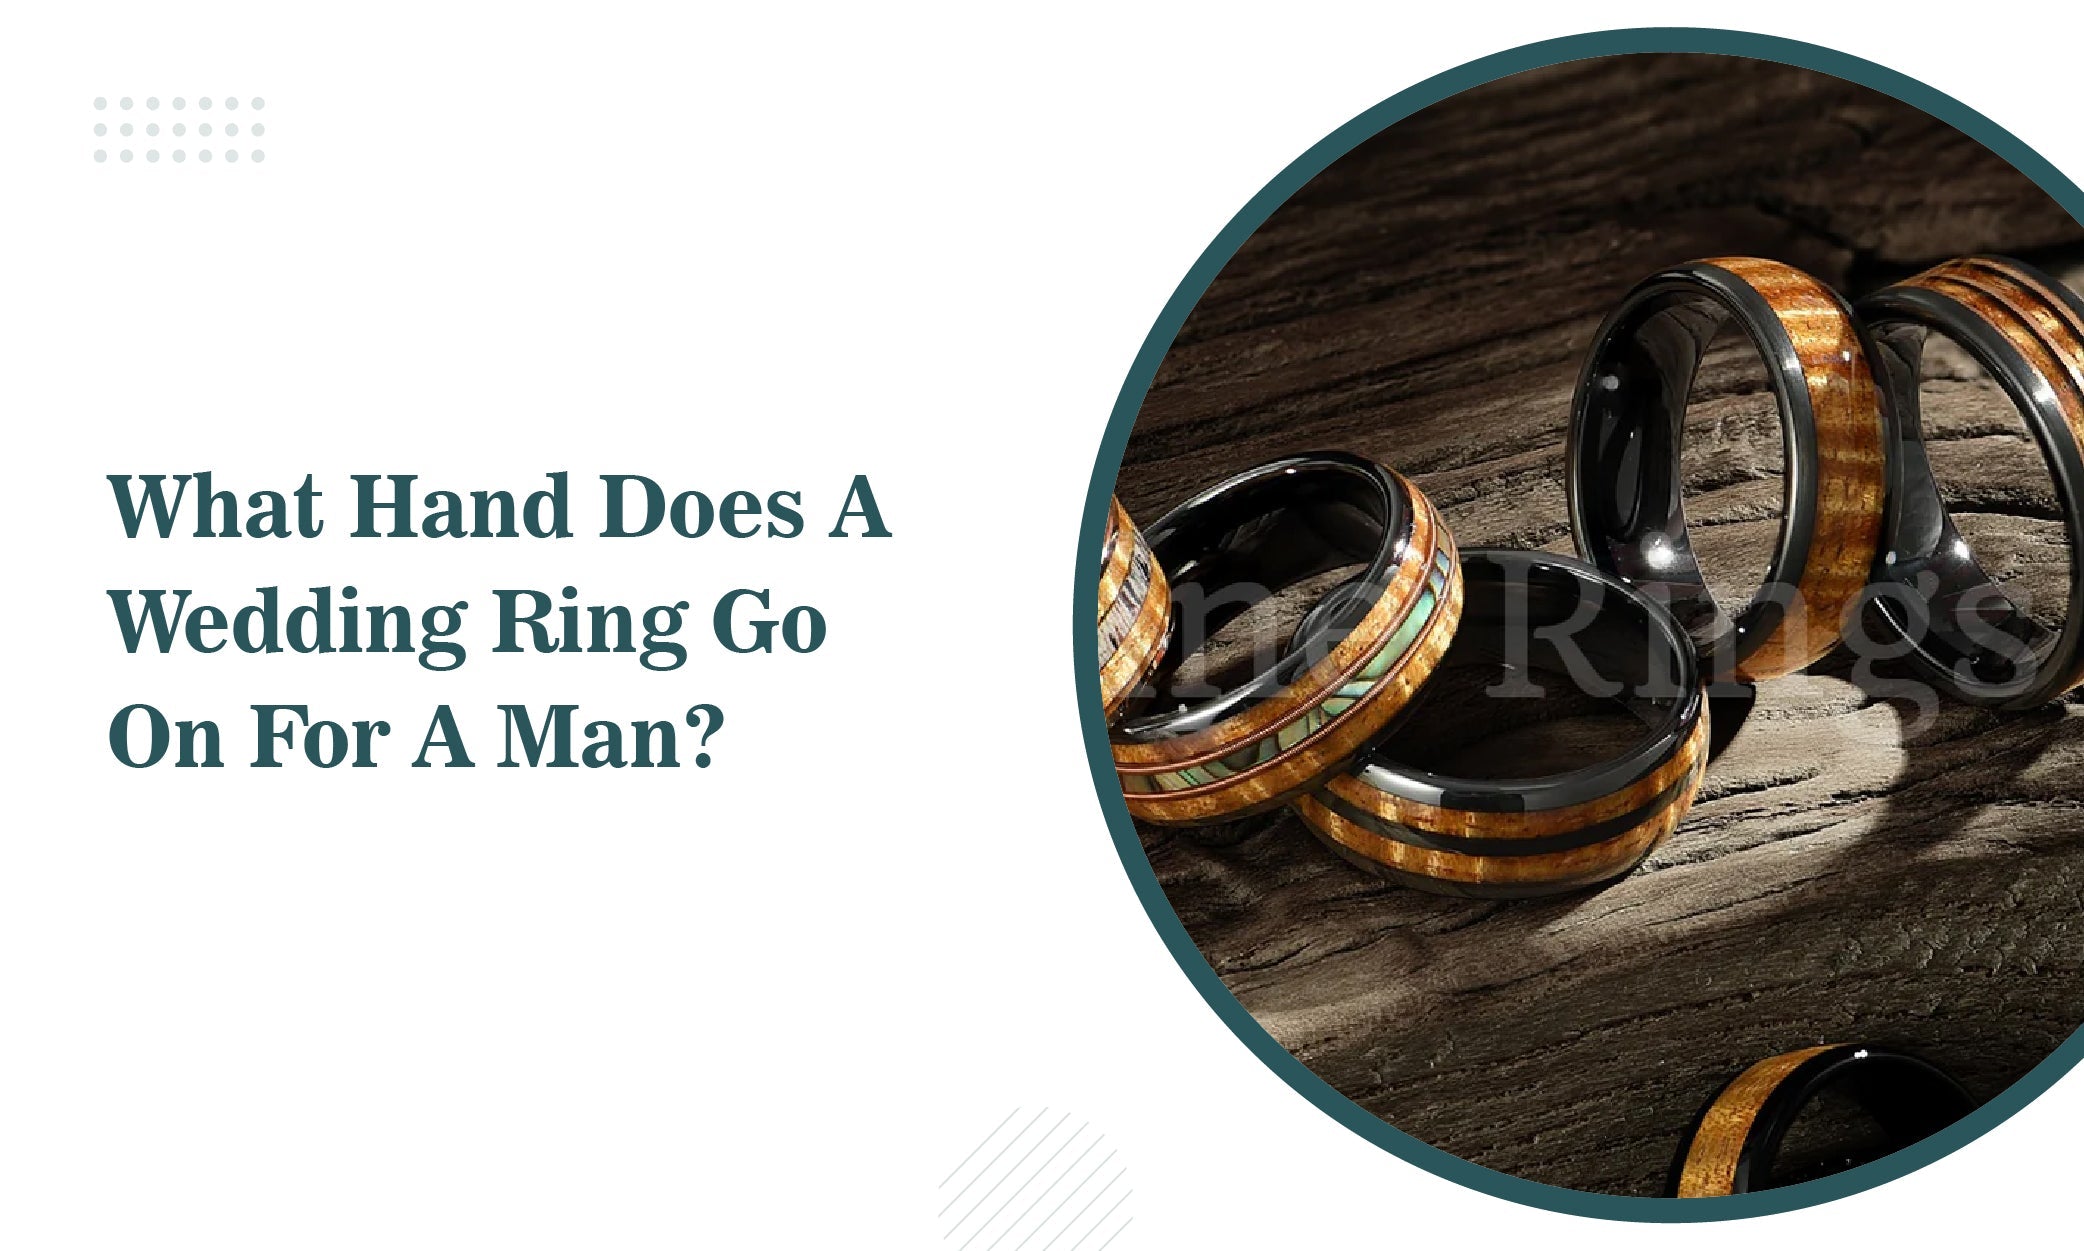 Which Hand Is A Wedding Ring For A Man